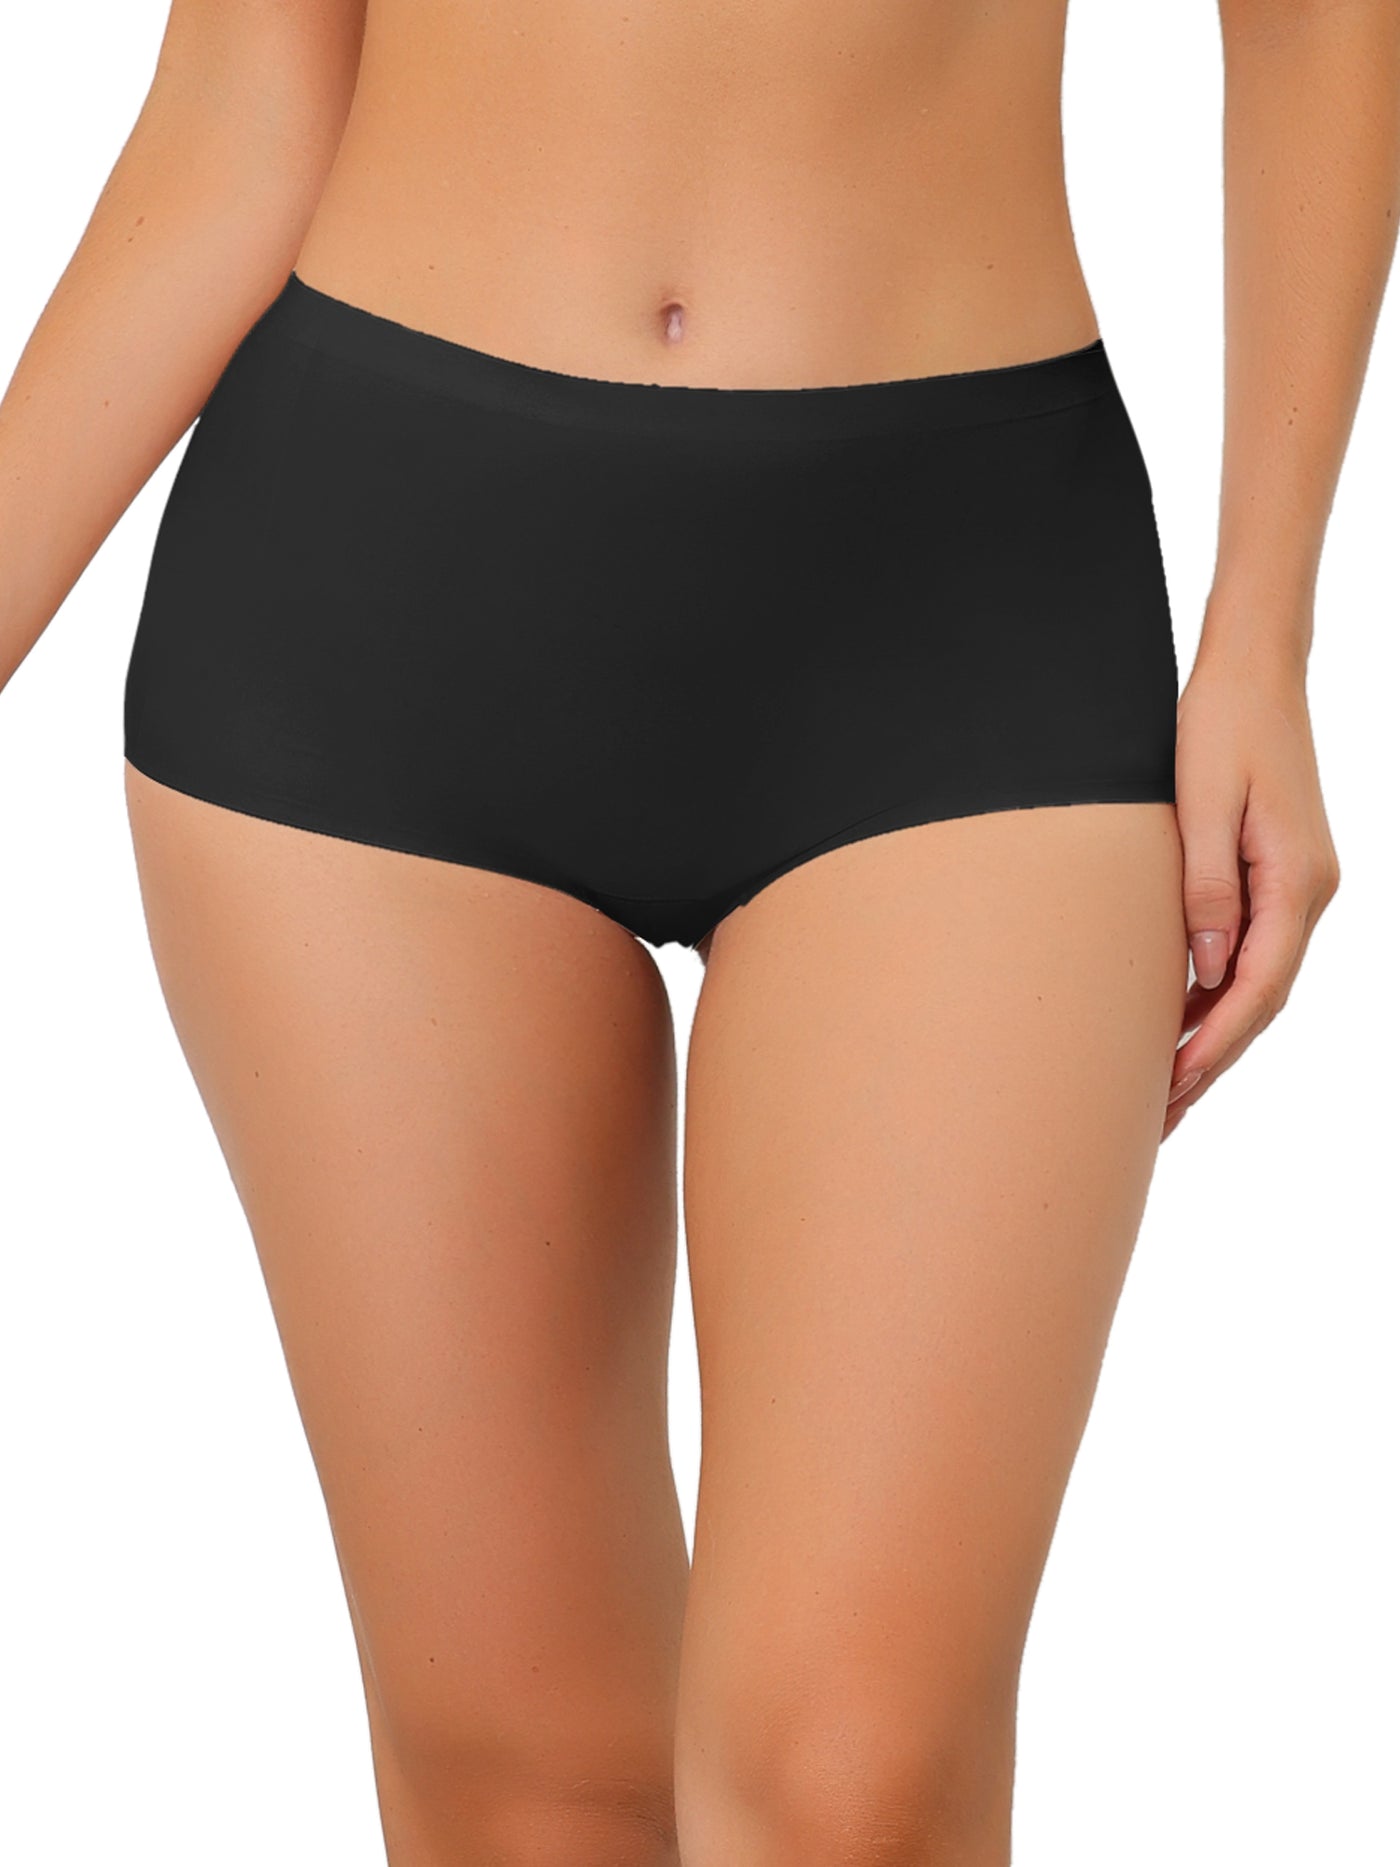 Allegra K Women's Boyshorts Underwear Unlined Invisible Mid Rise Stretch Solid Panties